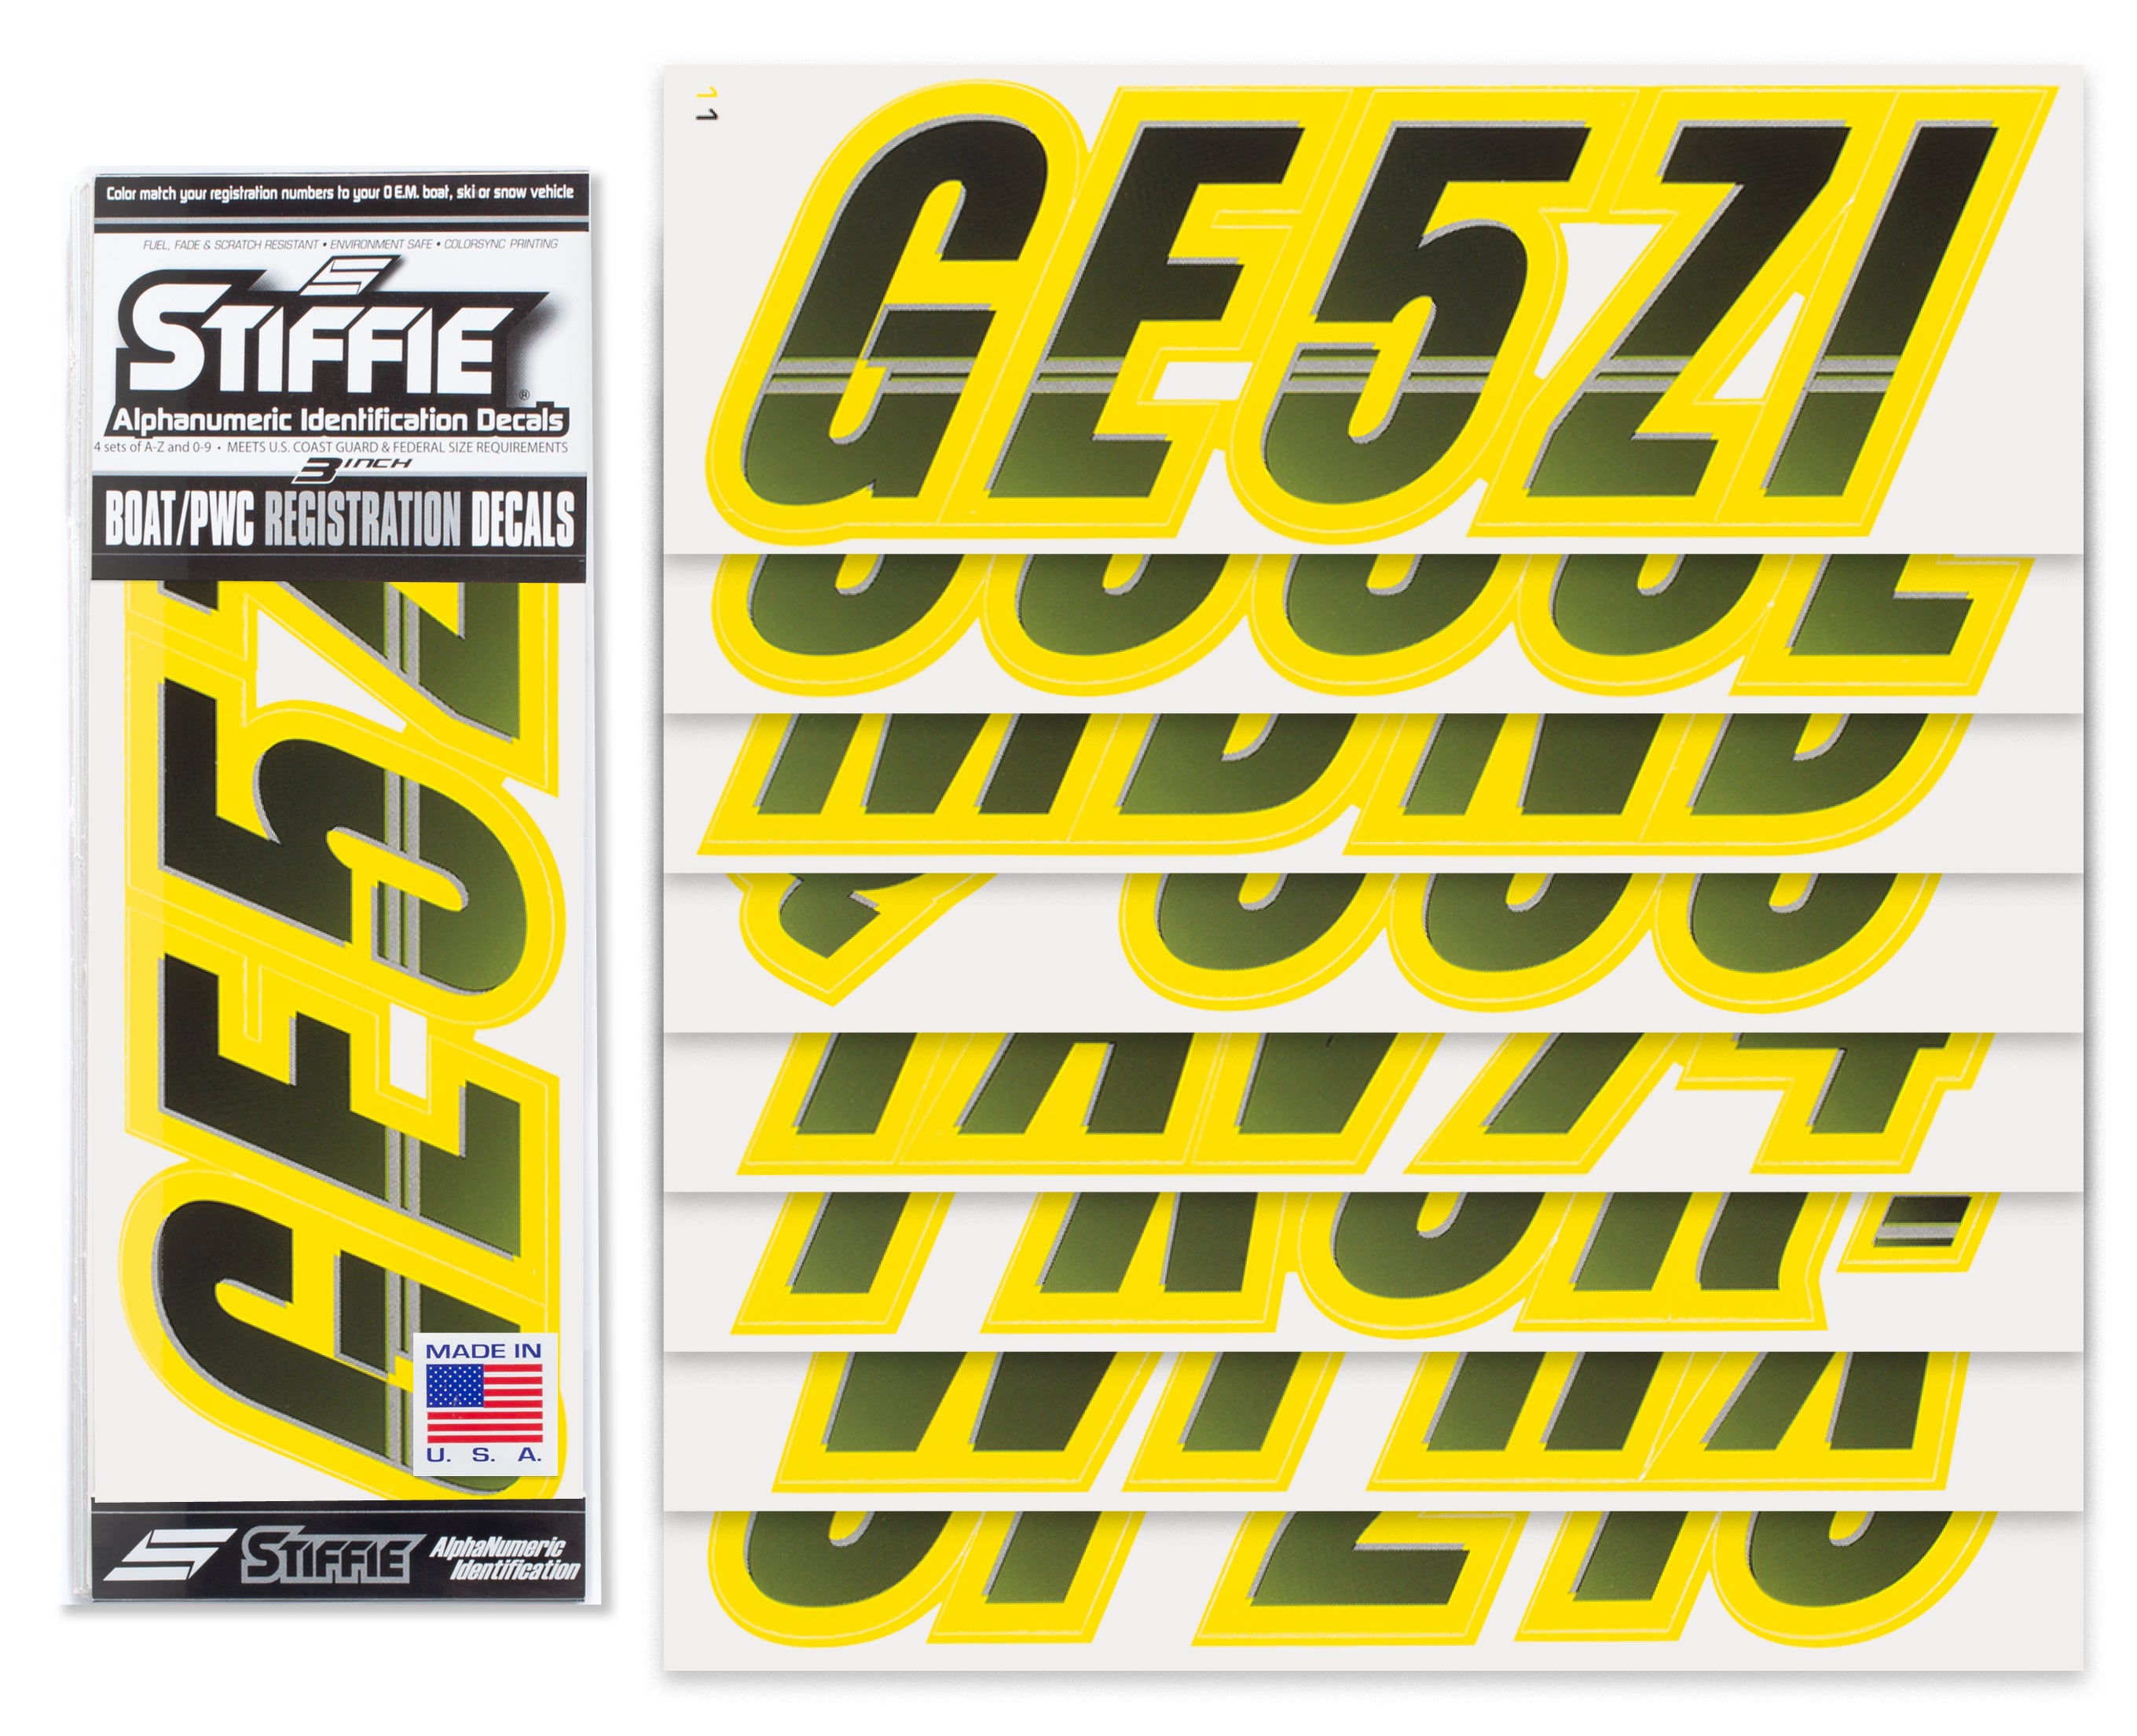 STIFFIE Techtron Black/Electric Yellow 3" Alpha-Numeric Registration Identification Numbers Stickers Decals for Boats & Personal Watercraft